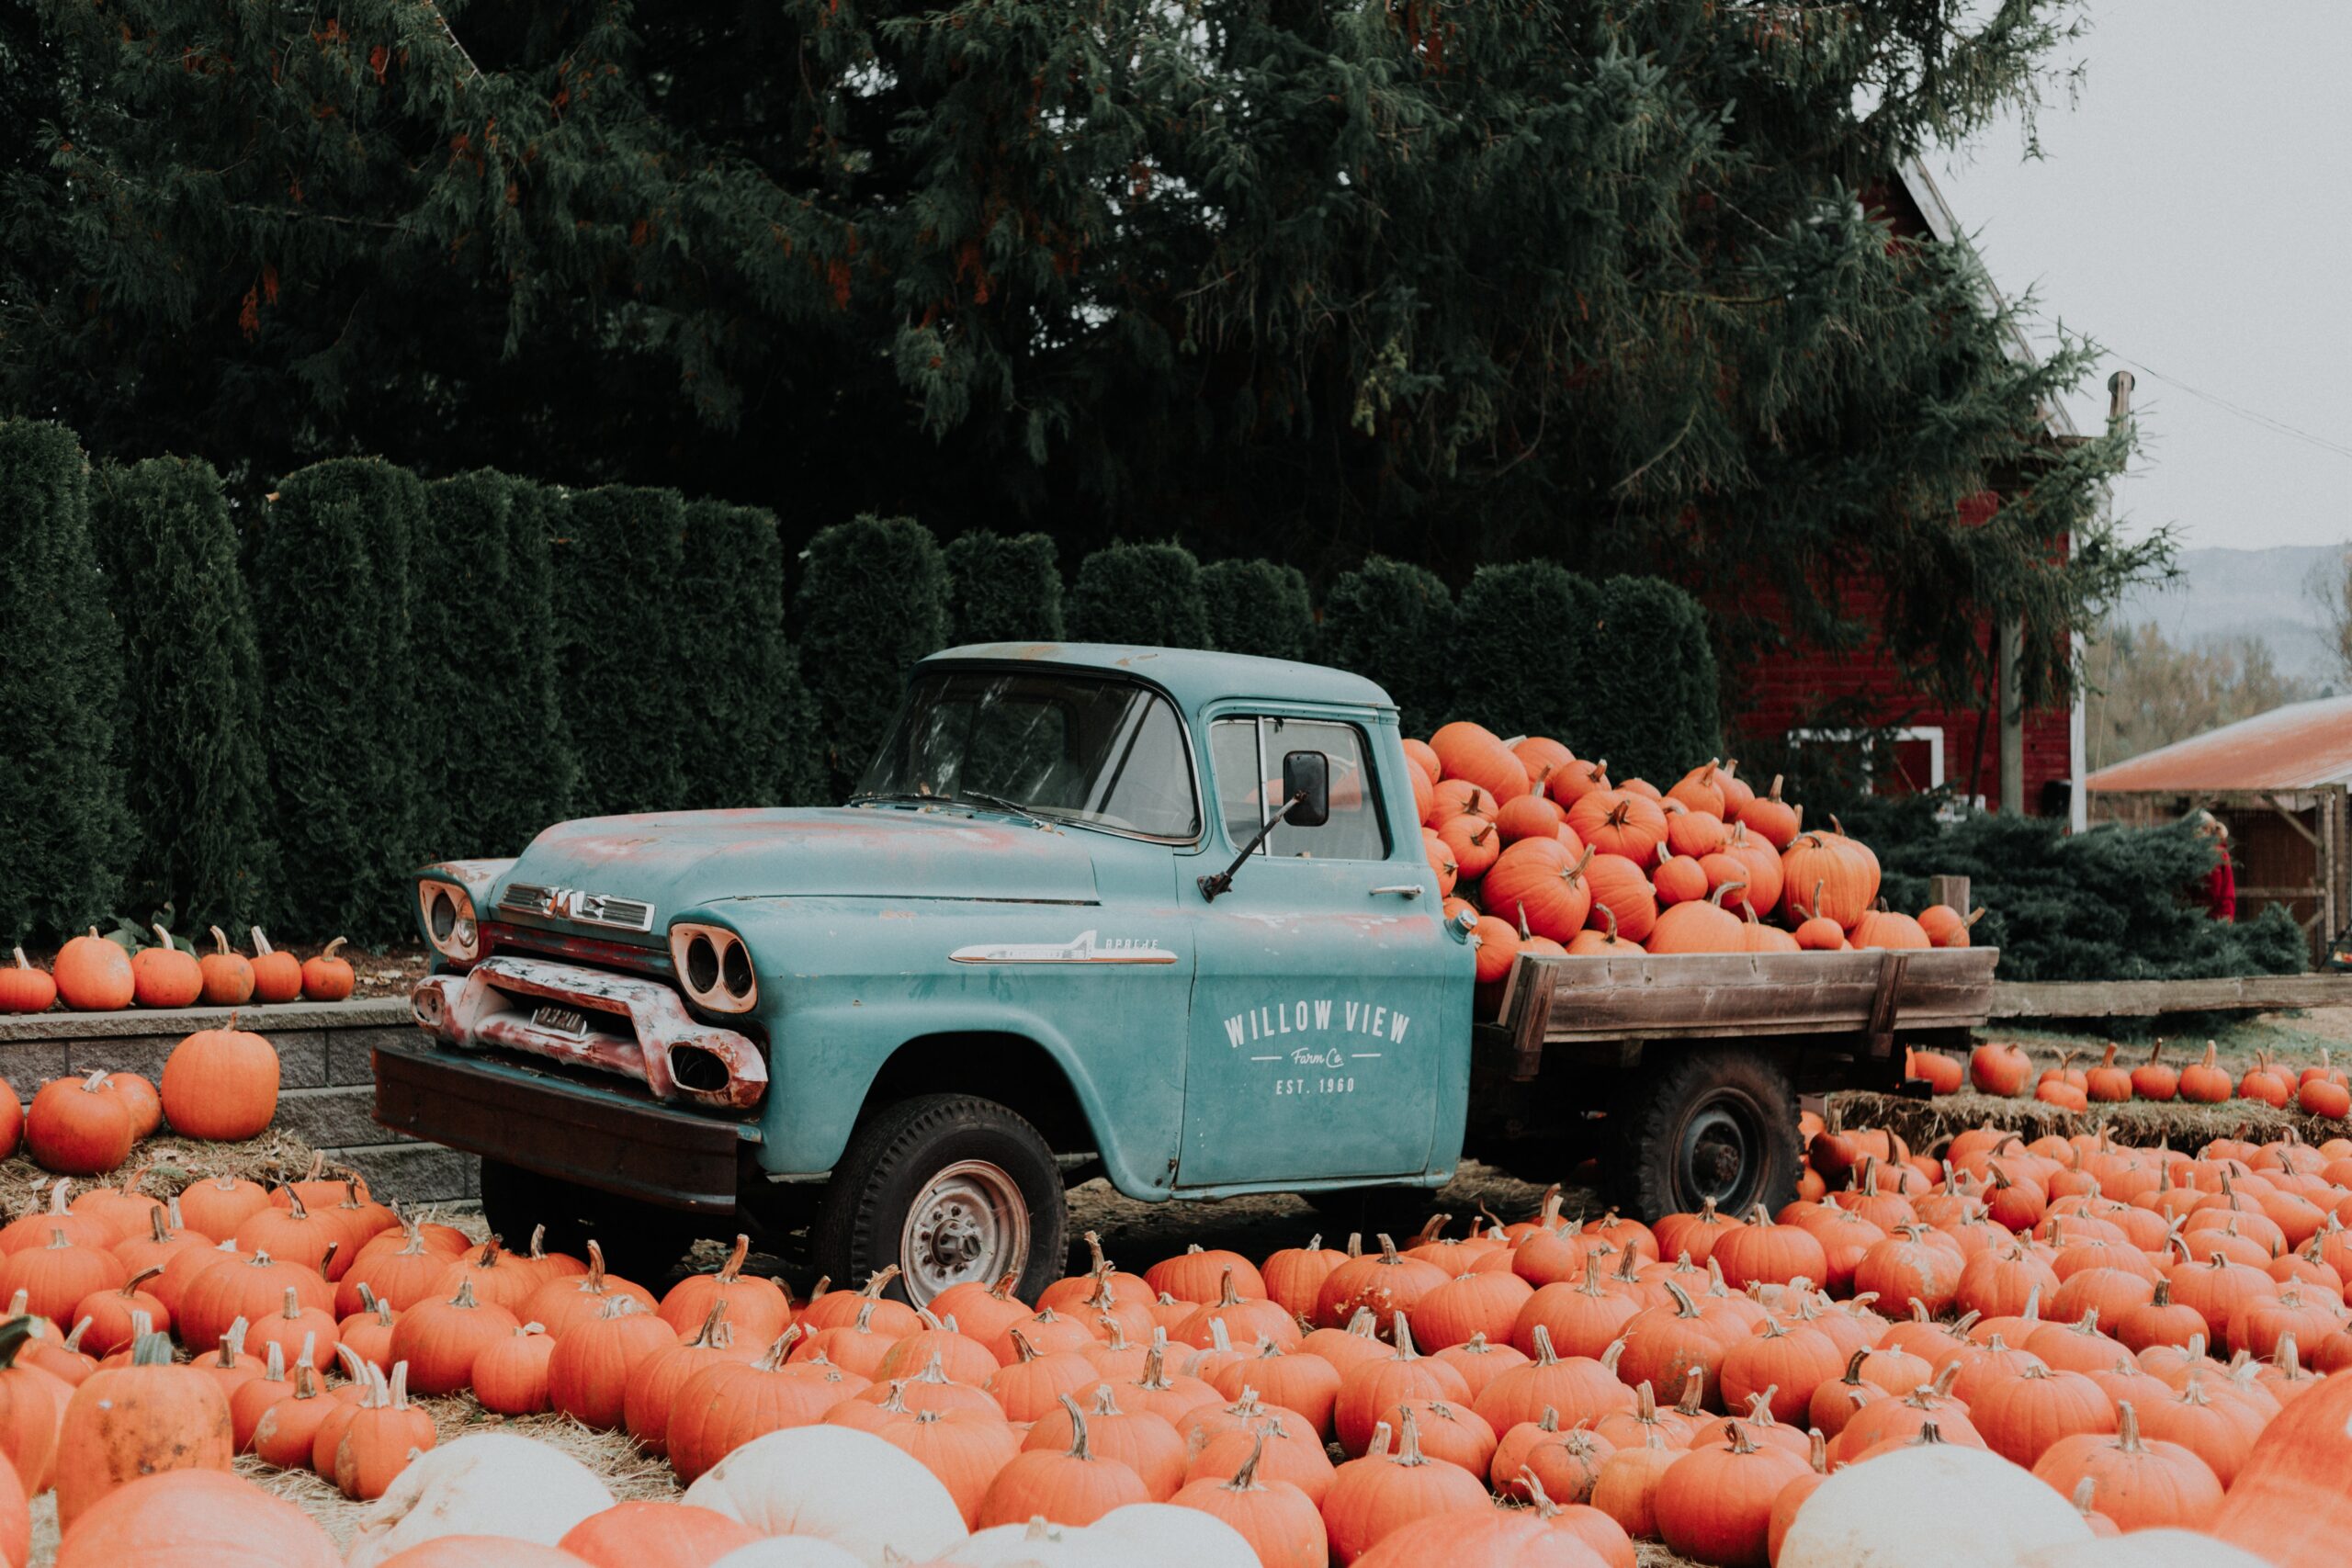 An old pick-up truck filled with pumpkins and surrounded by pumpkins